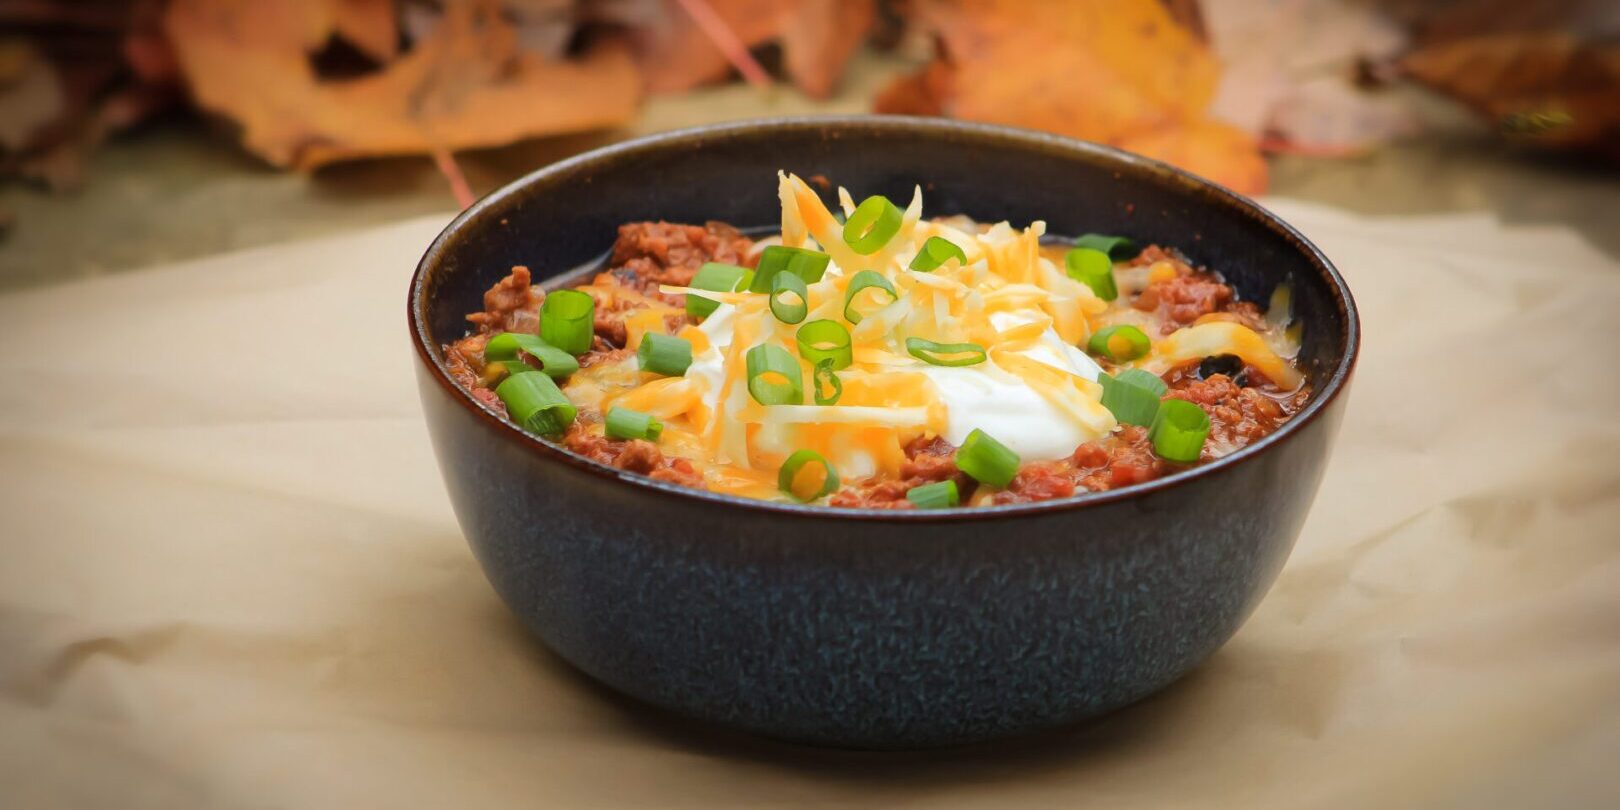 A bowl of chili with cheese and green onions.